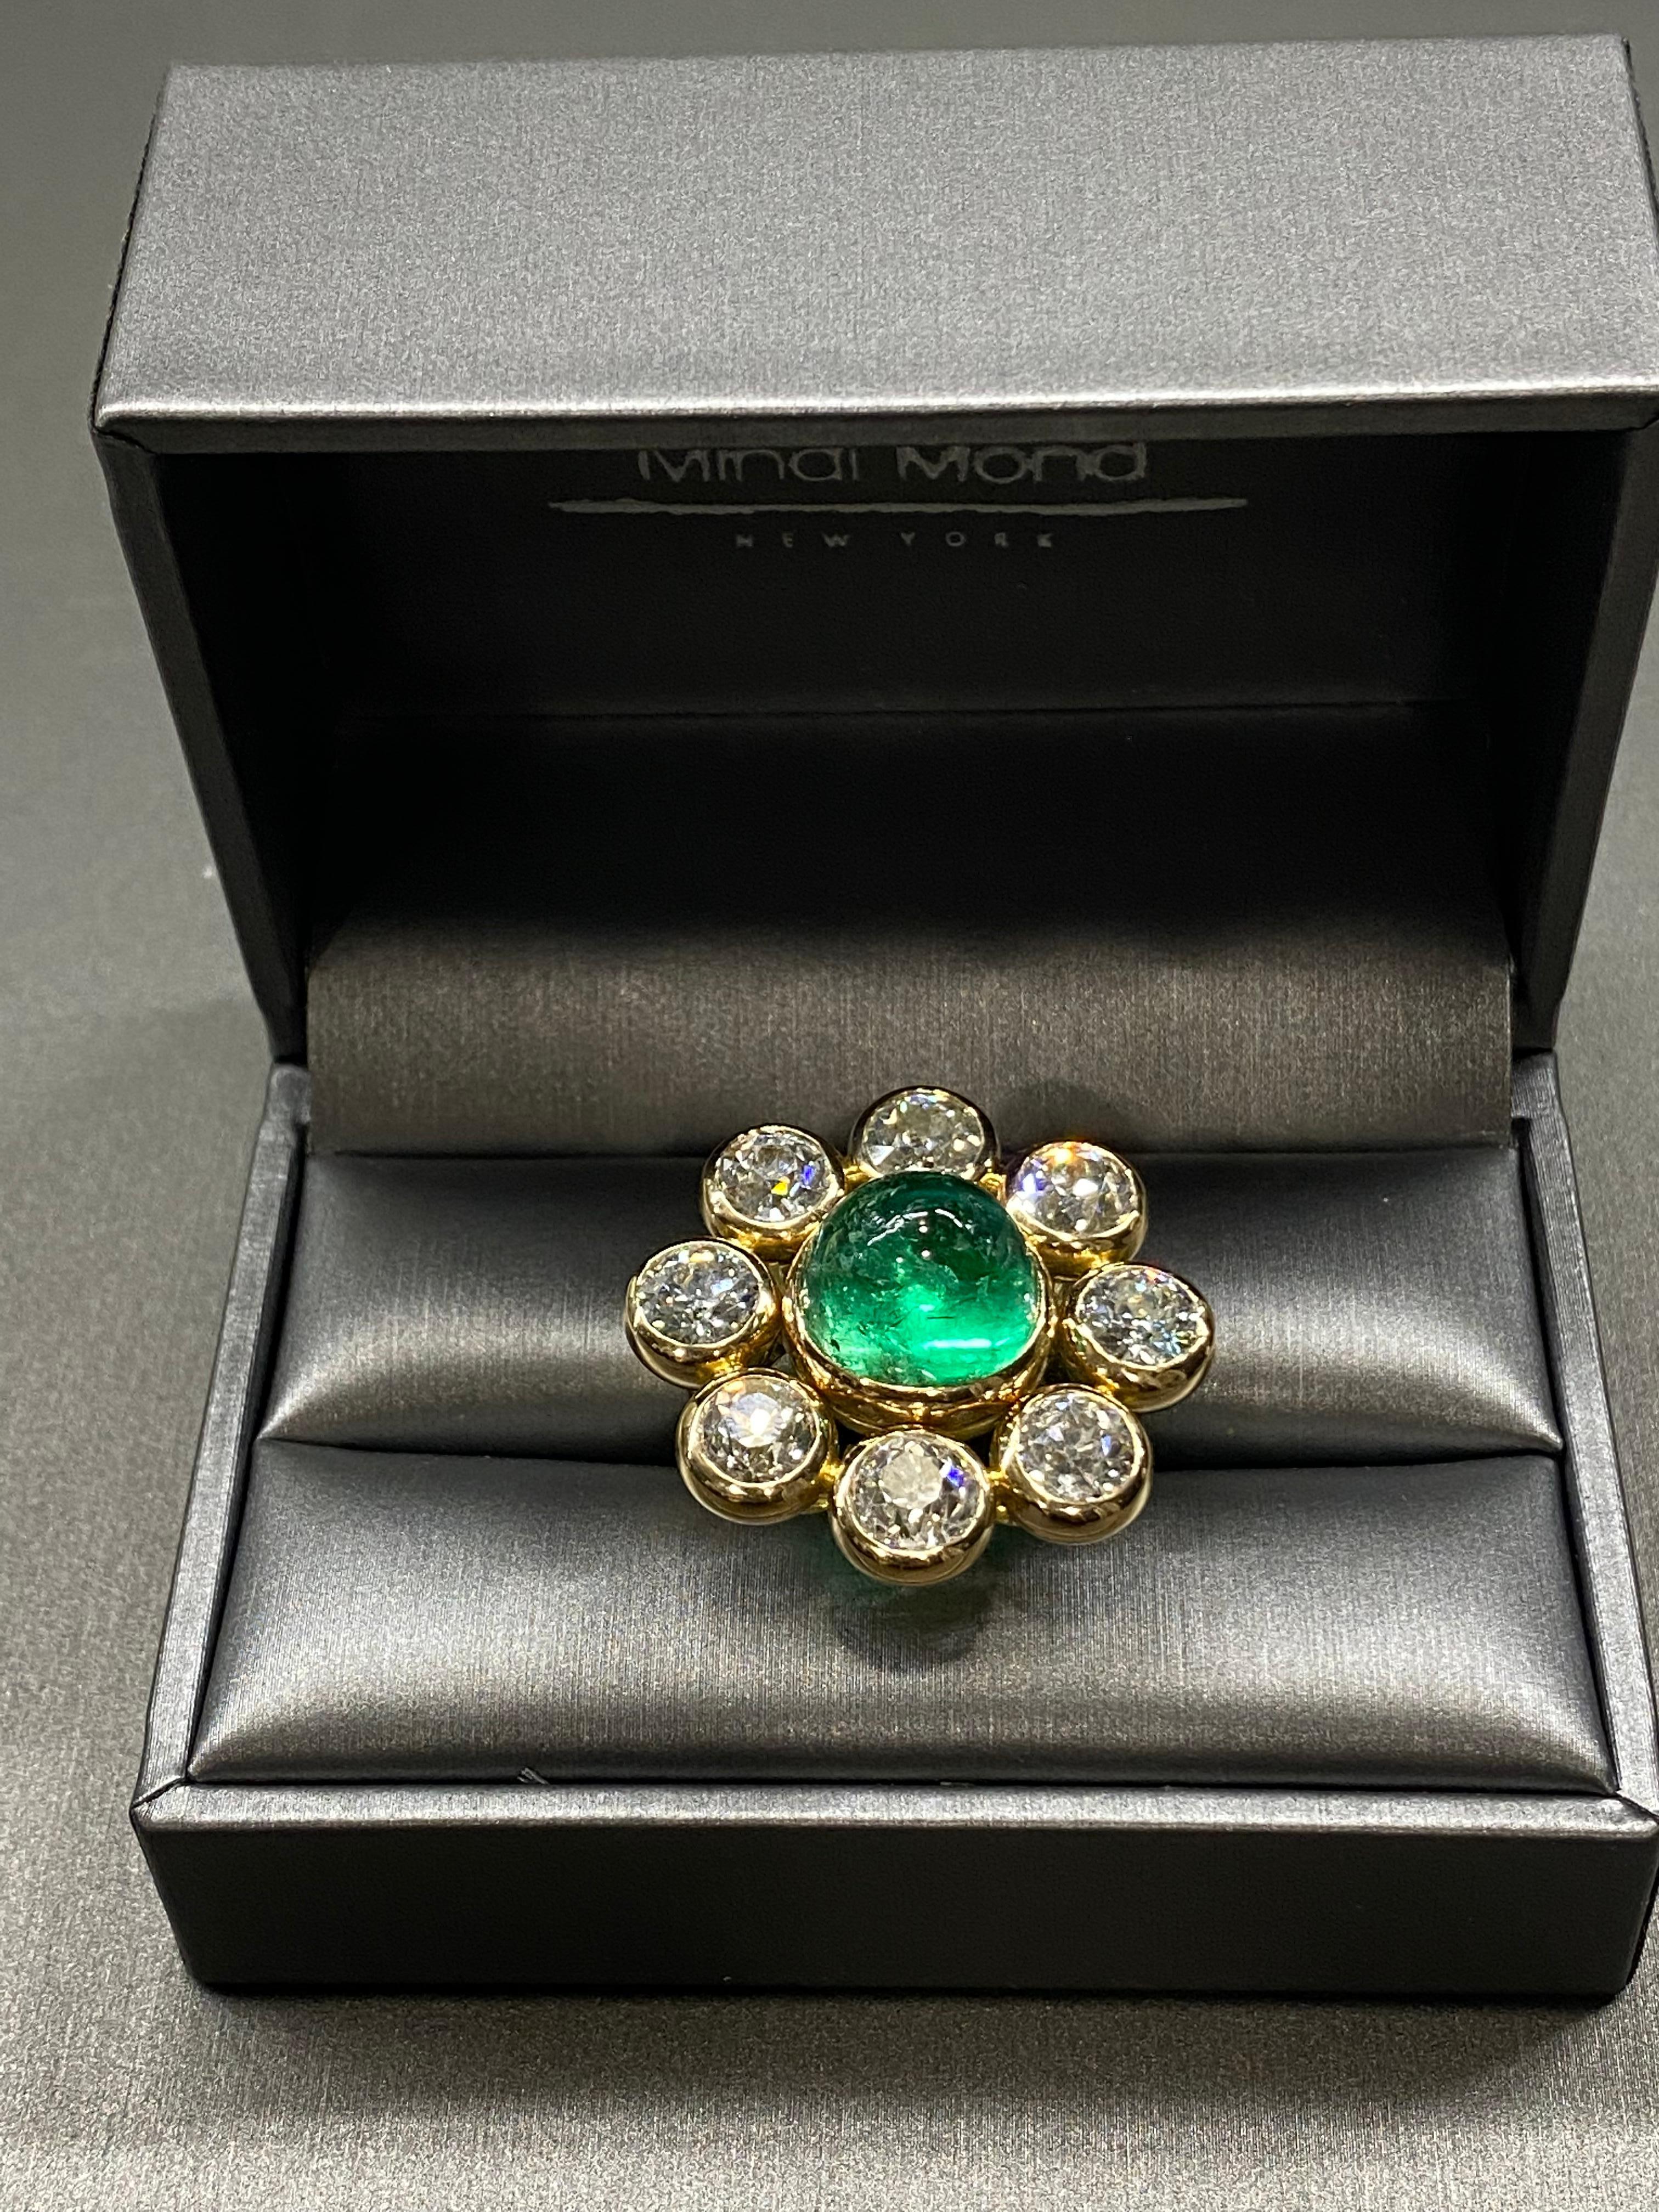 Mindi Mond 12 Carat Colombian Emerald Diamond Yellow Gold Cocktail Ring In Good Condition For Sale In New York, NY